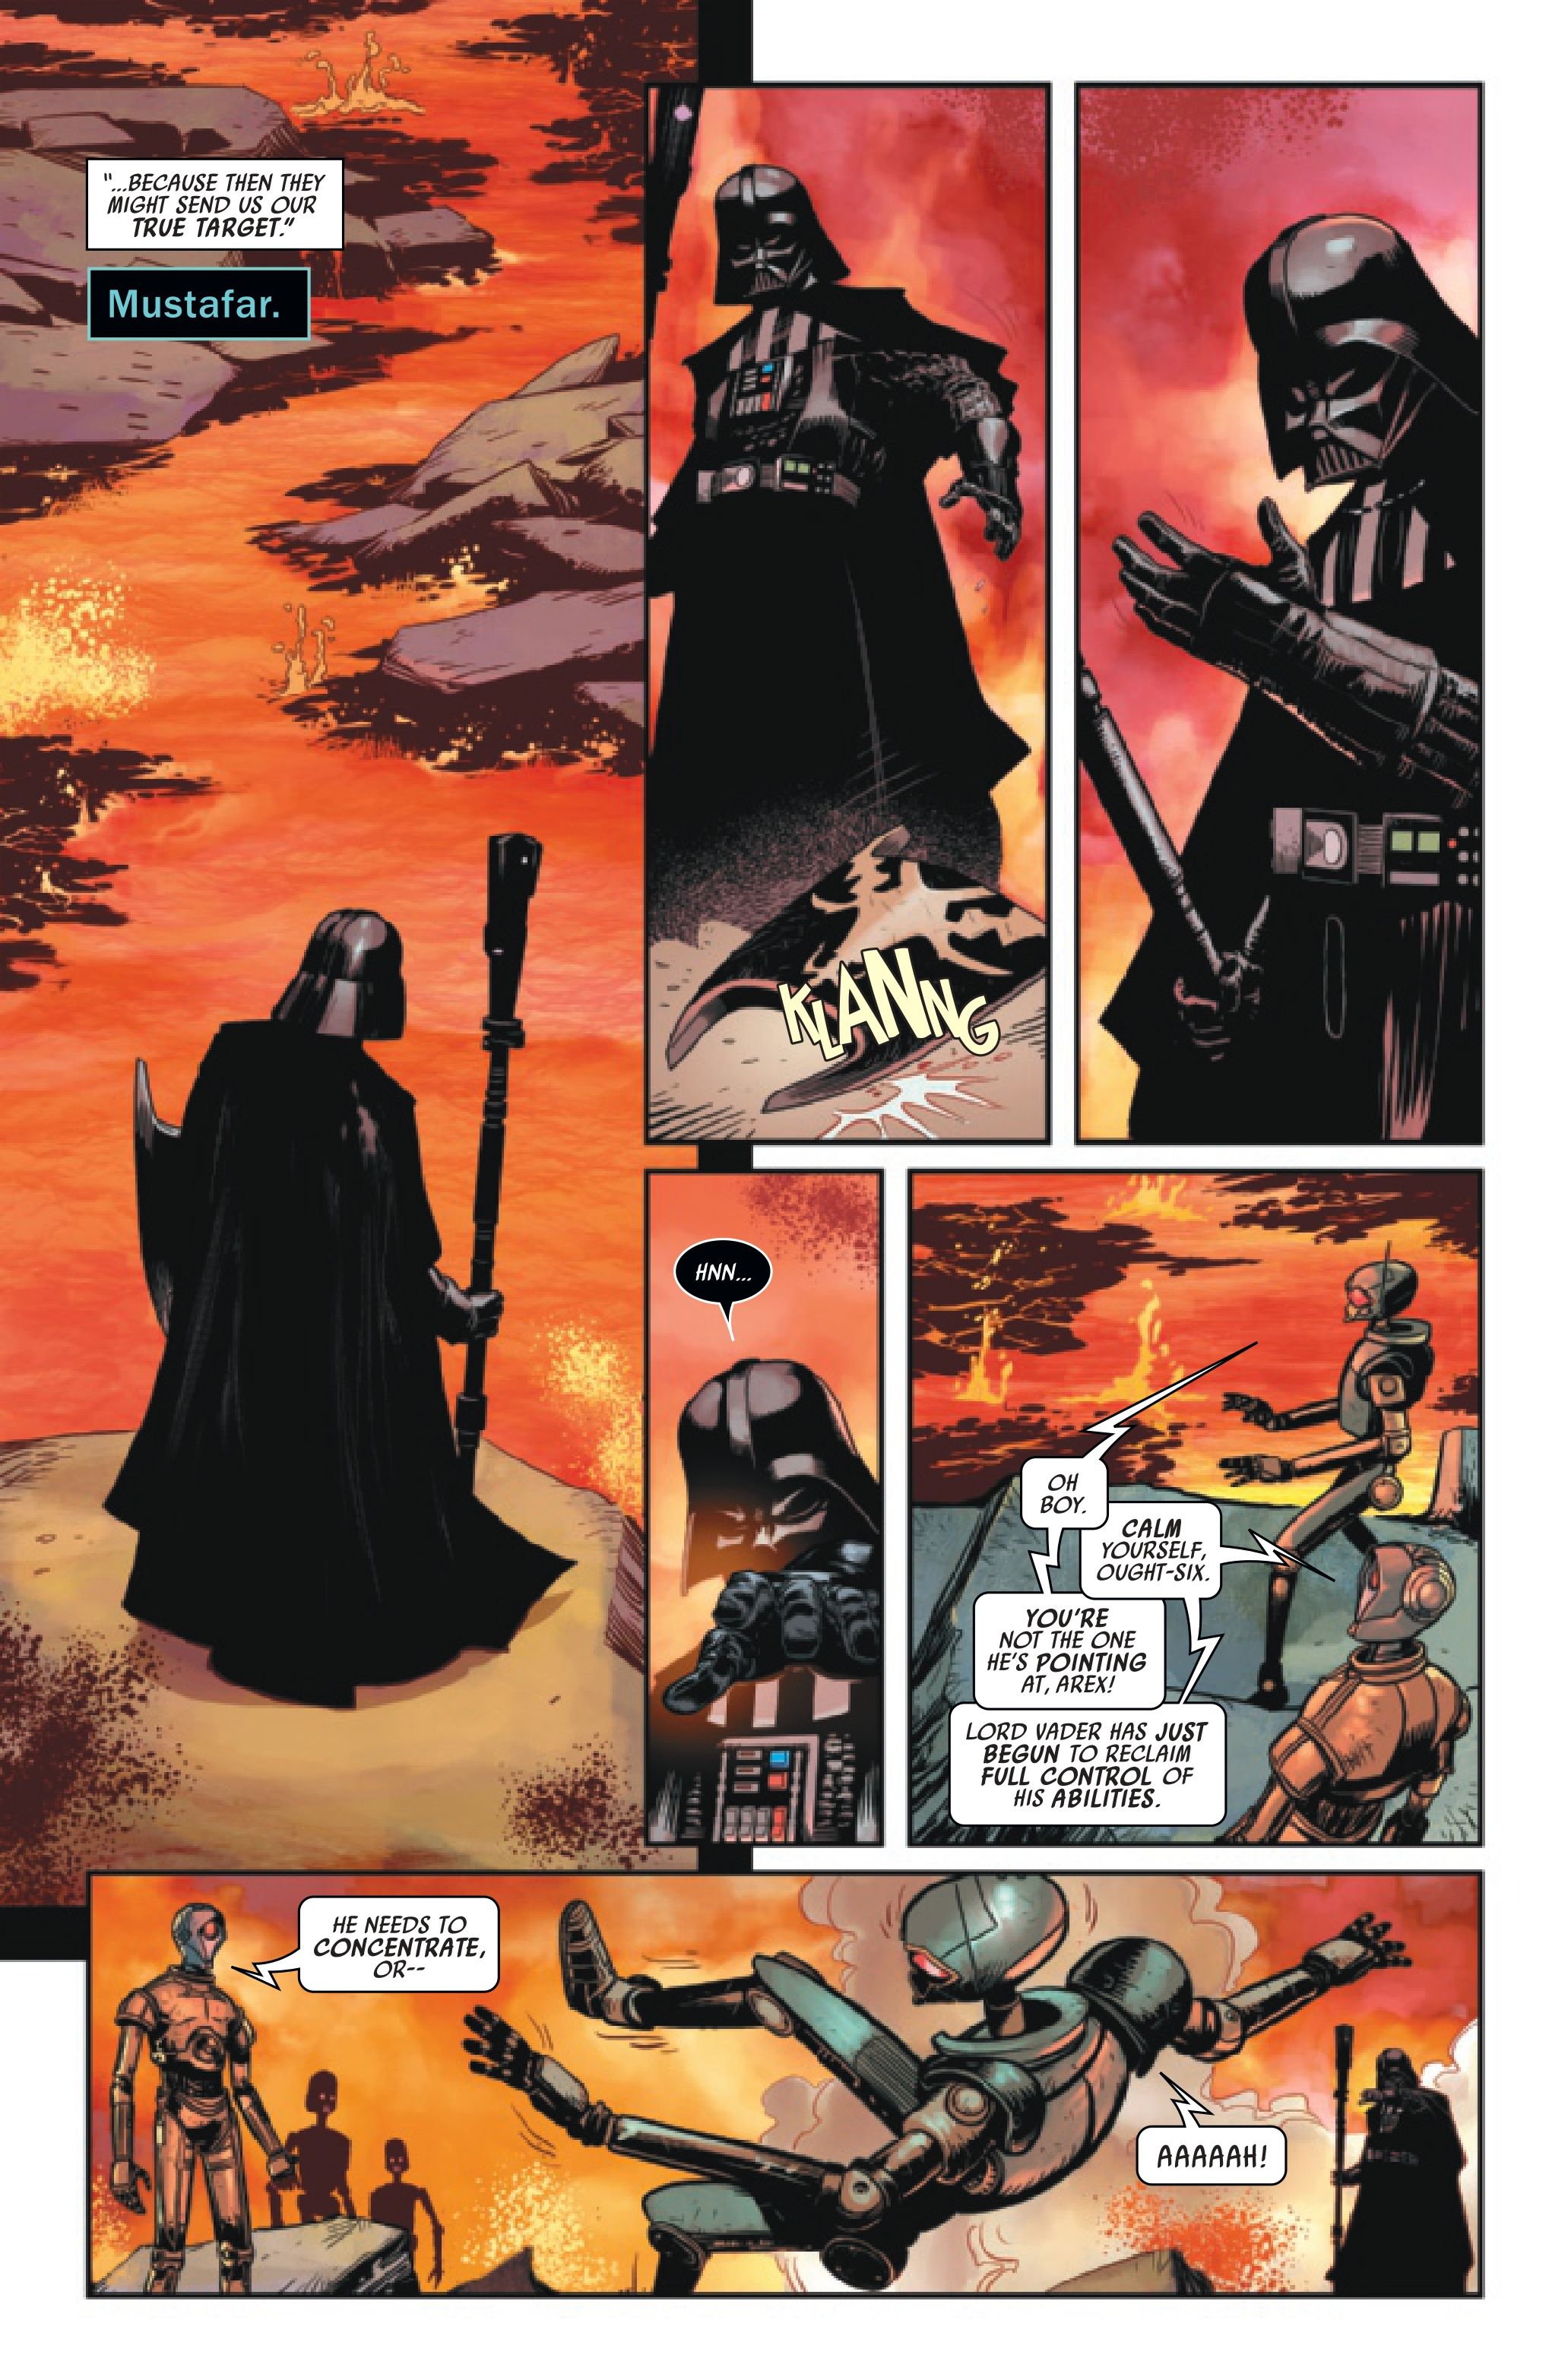 Review: 'Darth Vader' #34 - 'Unbound Force: Part 2' Is a Lopsided Chapter  in Vader and Sabé's Arc - Star Wars News Net